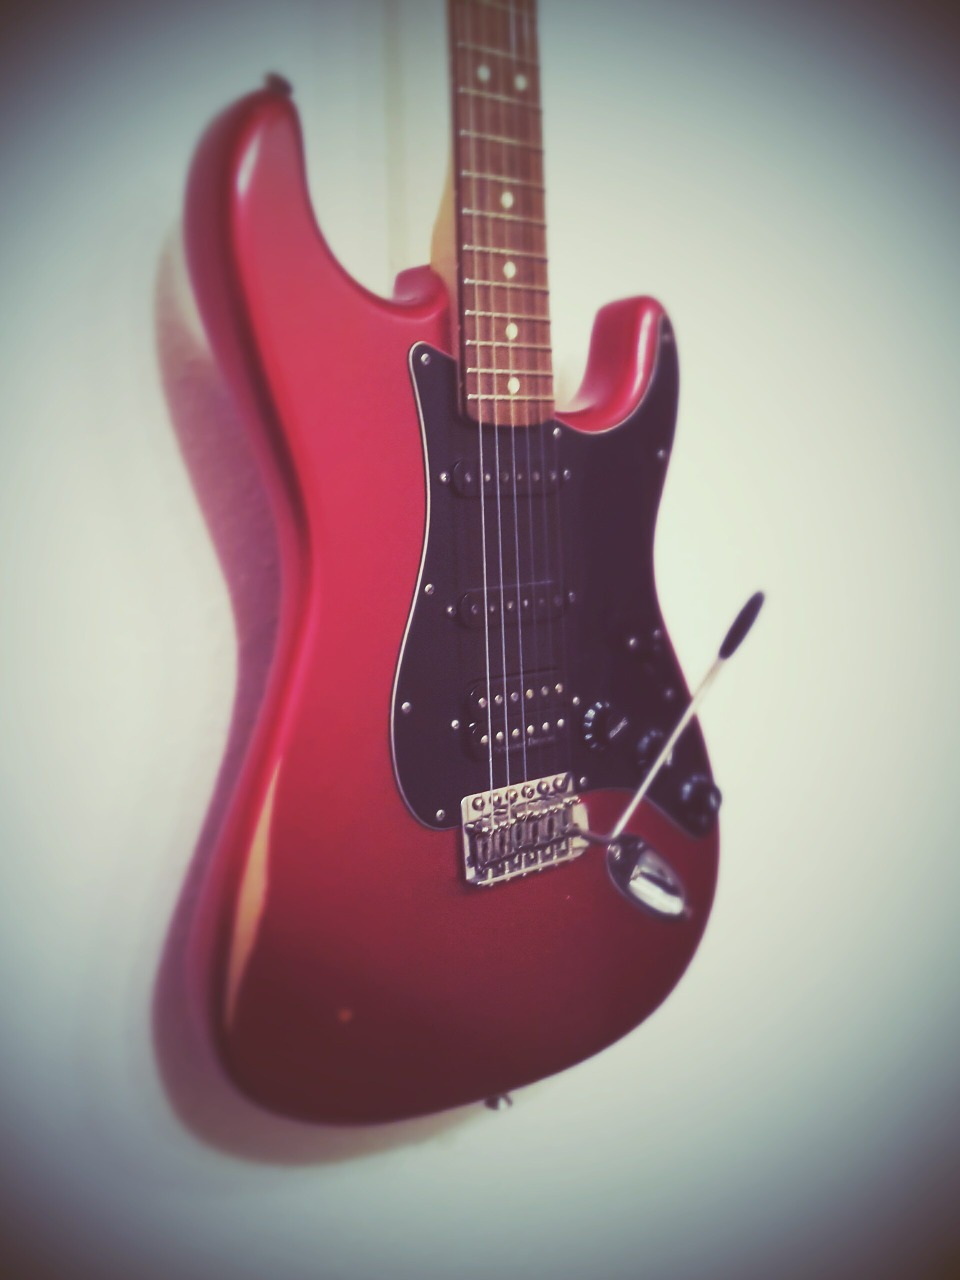 guitar stratocaster red free photo